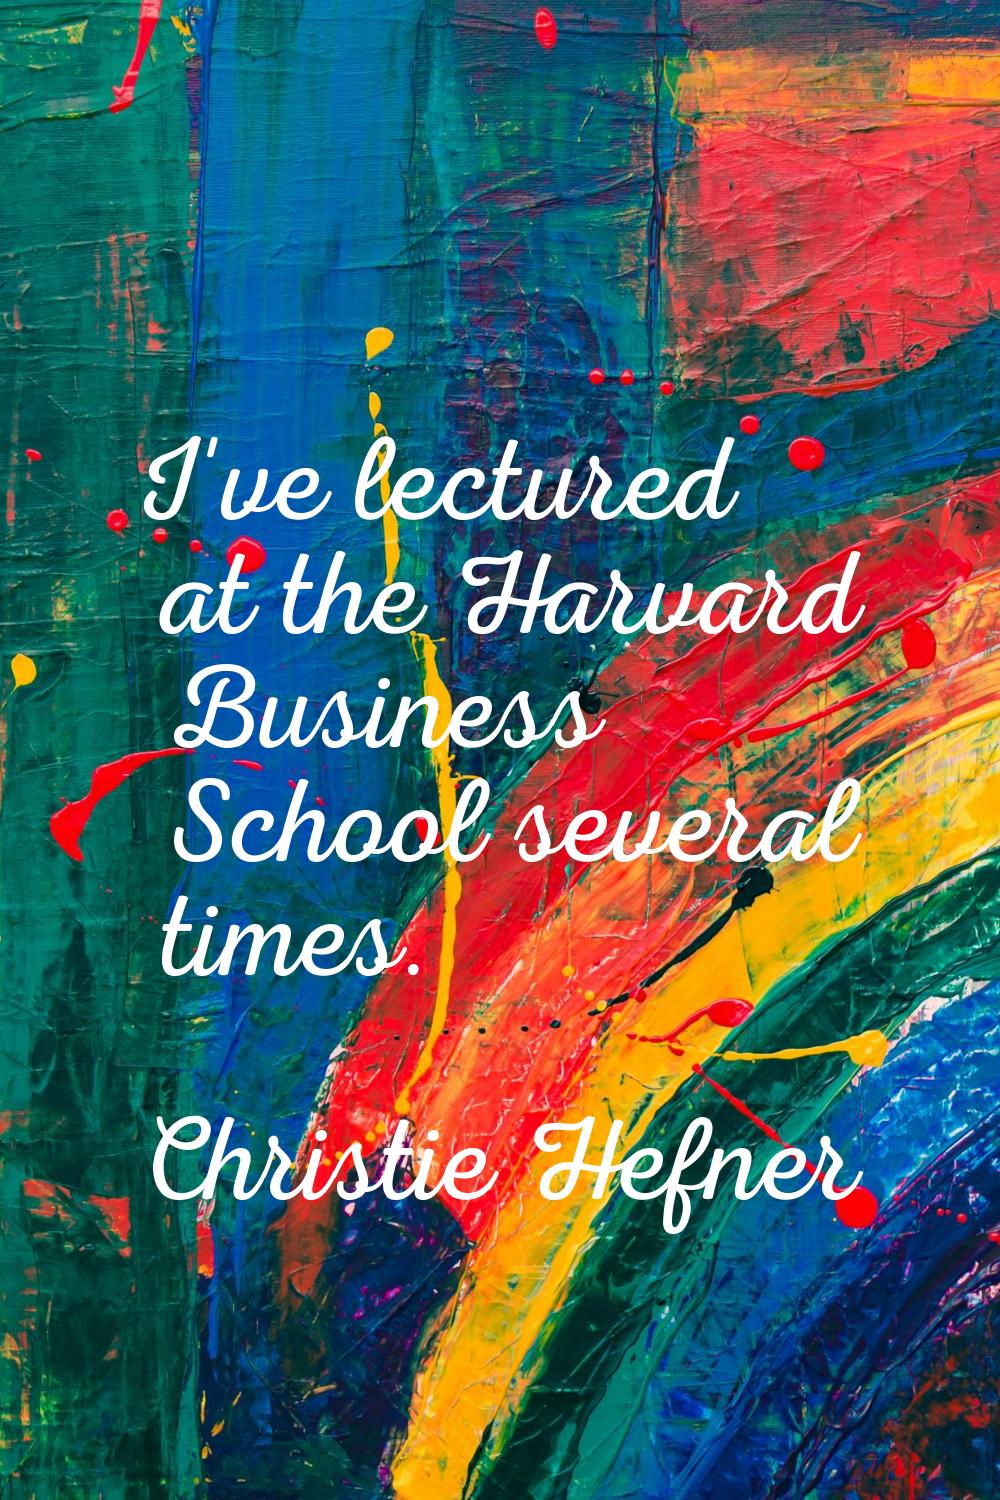 I've lectured at the Harvard Business School several times.